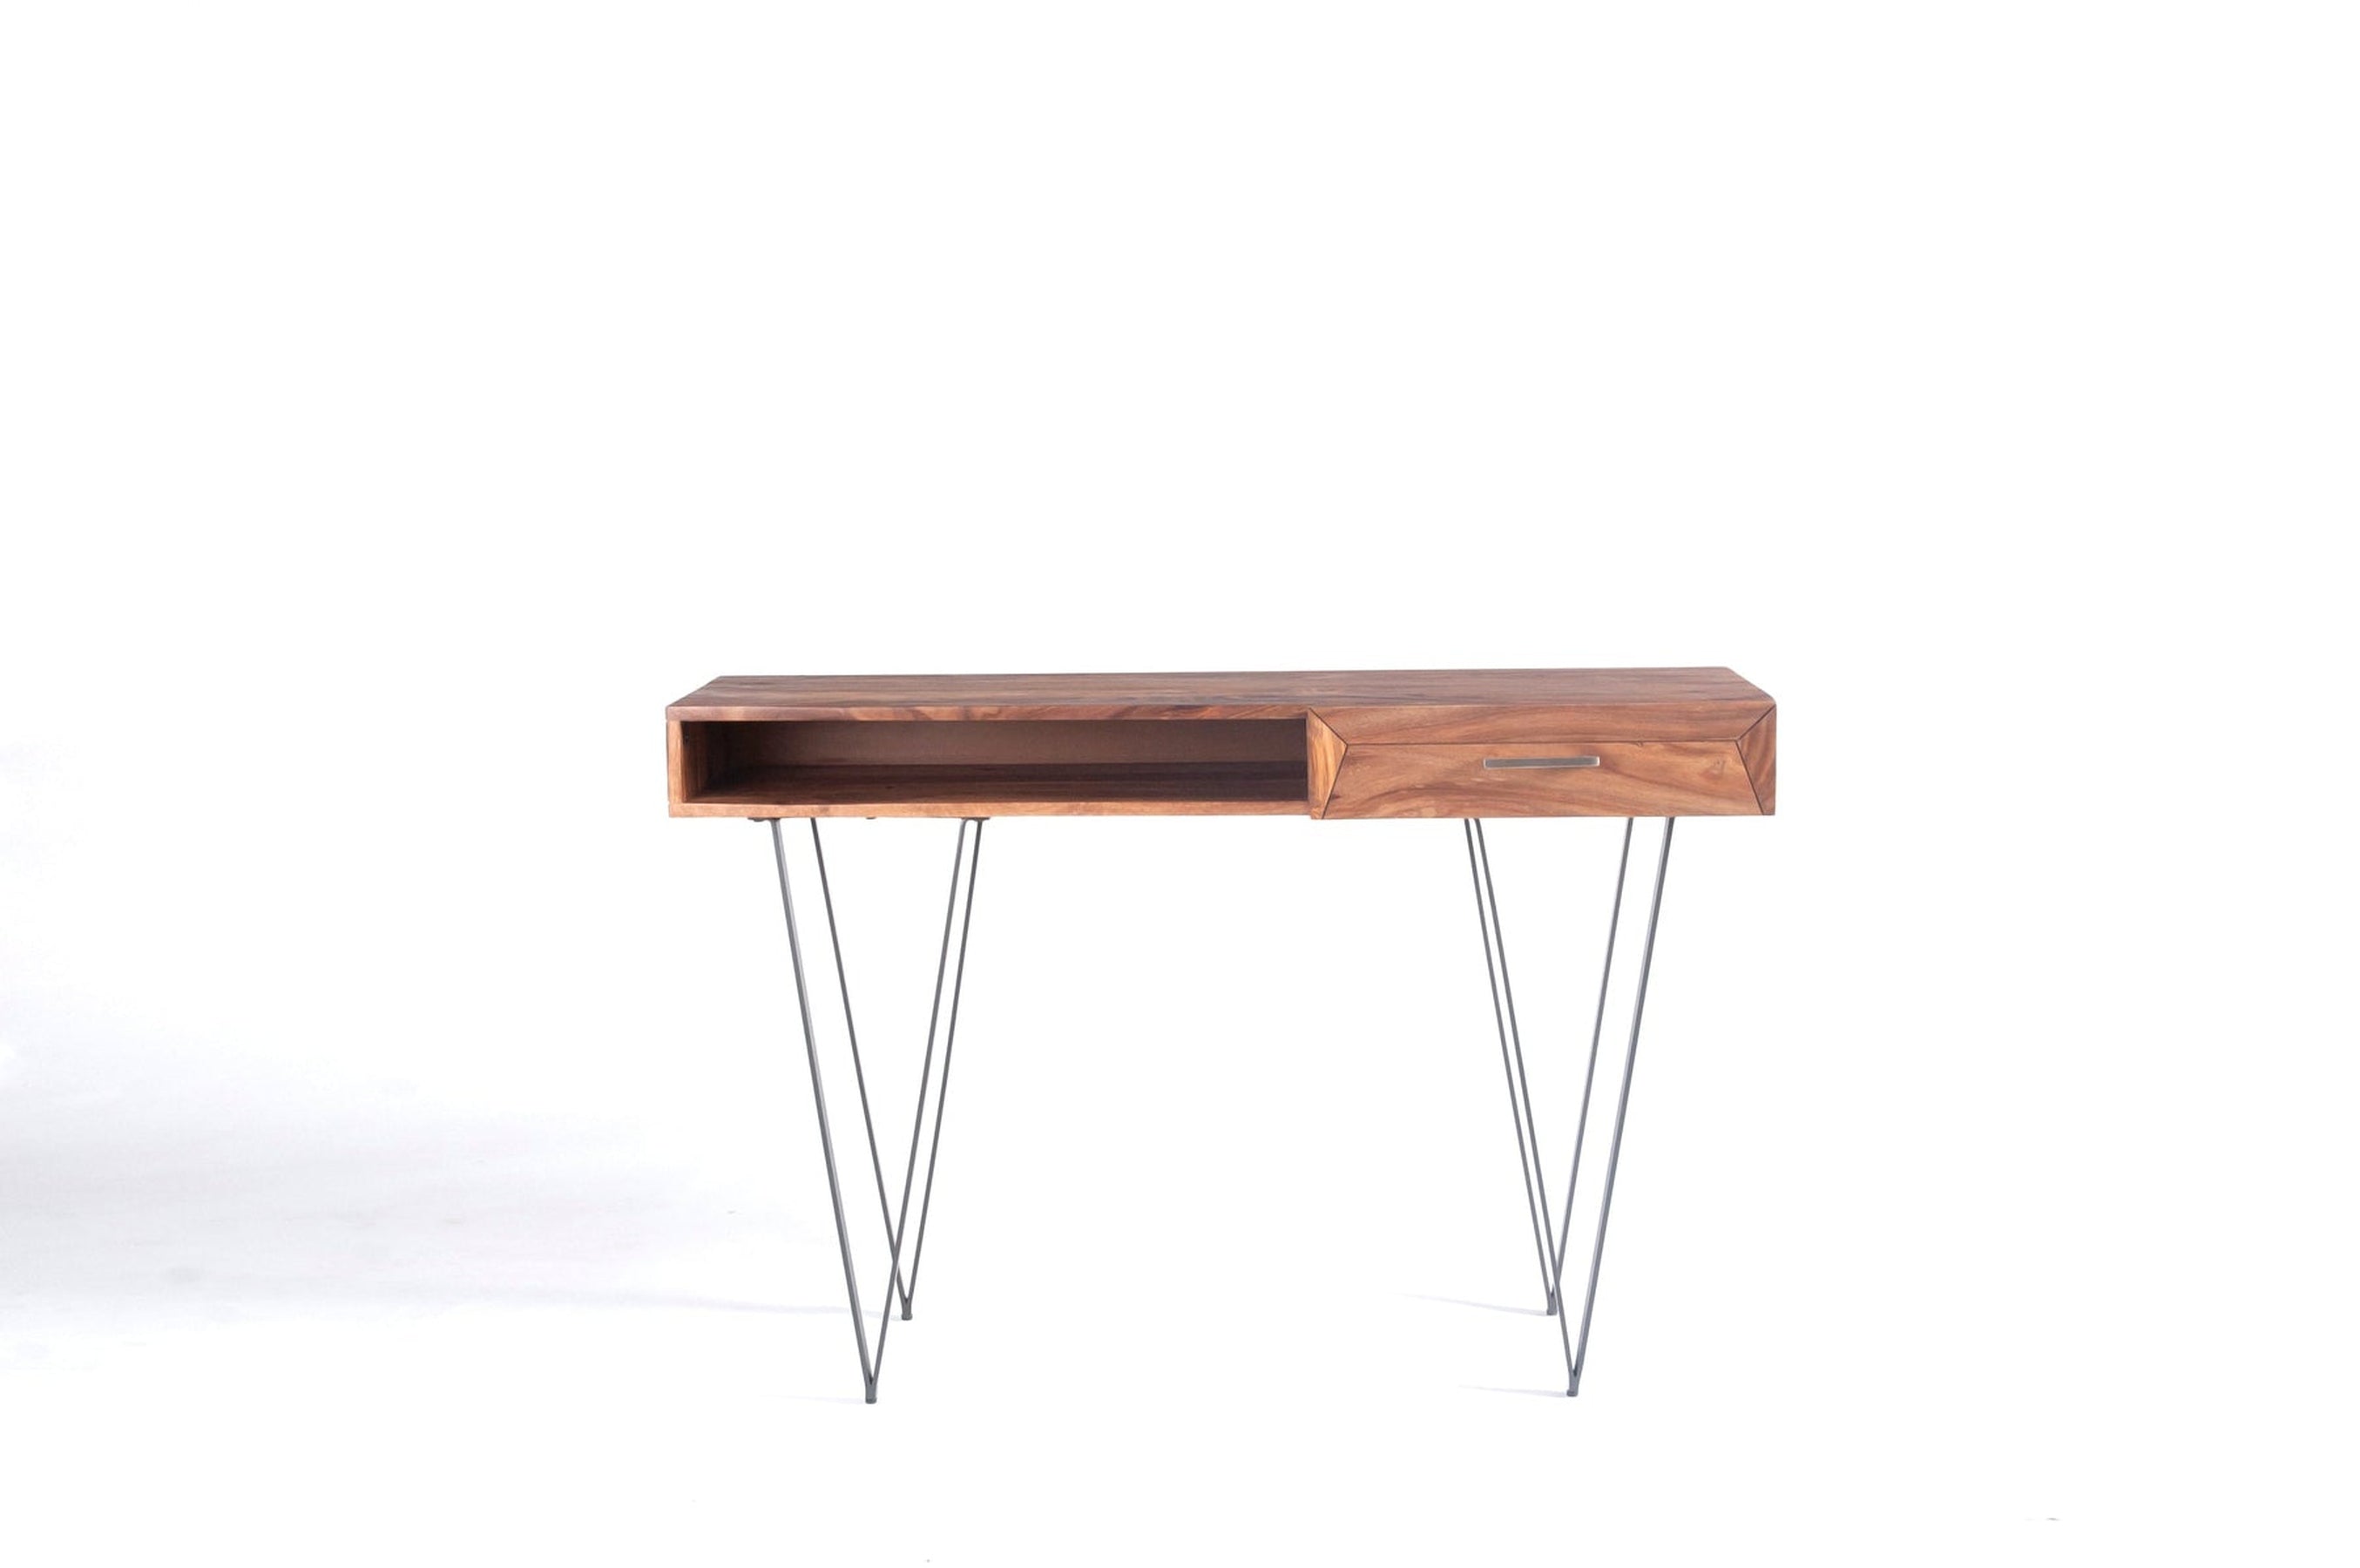 Metric Study Desk Console | Solid wood Contemporary Modern Home Office Desk | Console Table Desk | 19x10x50 Inch